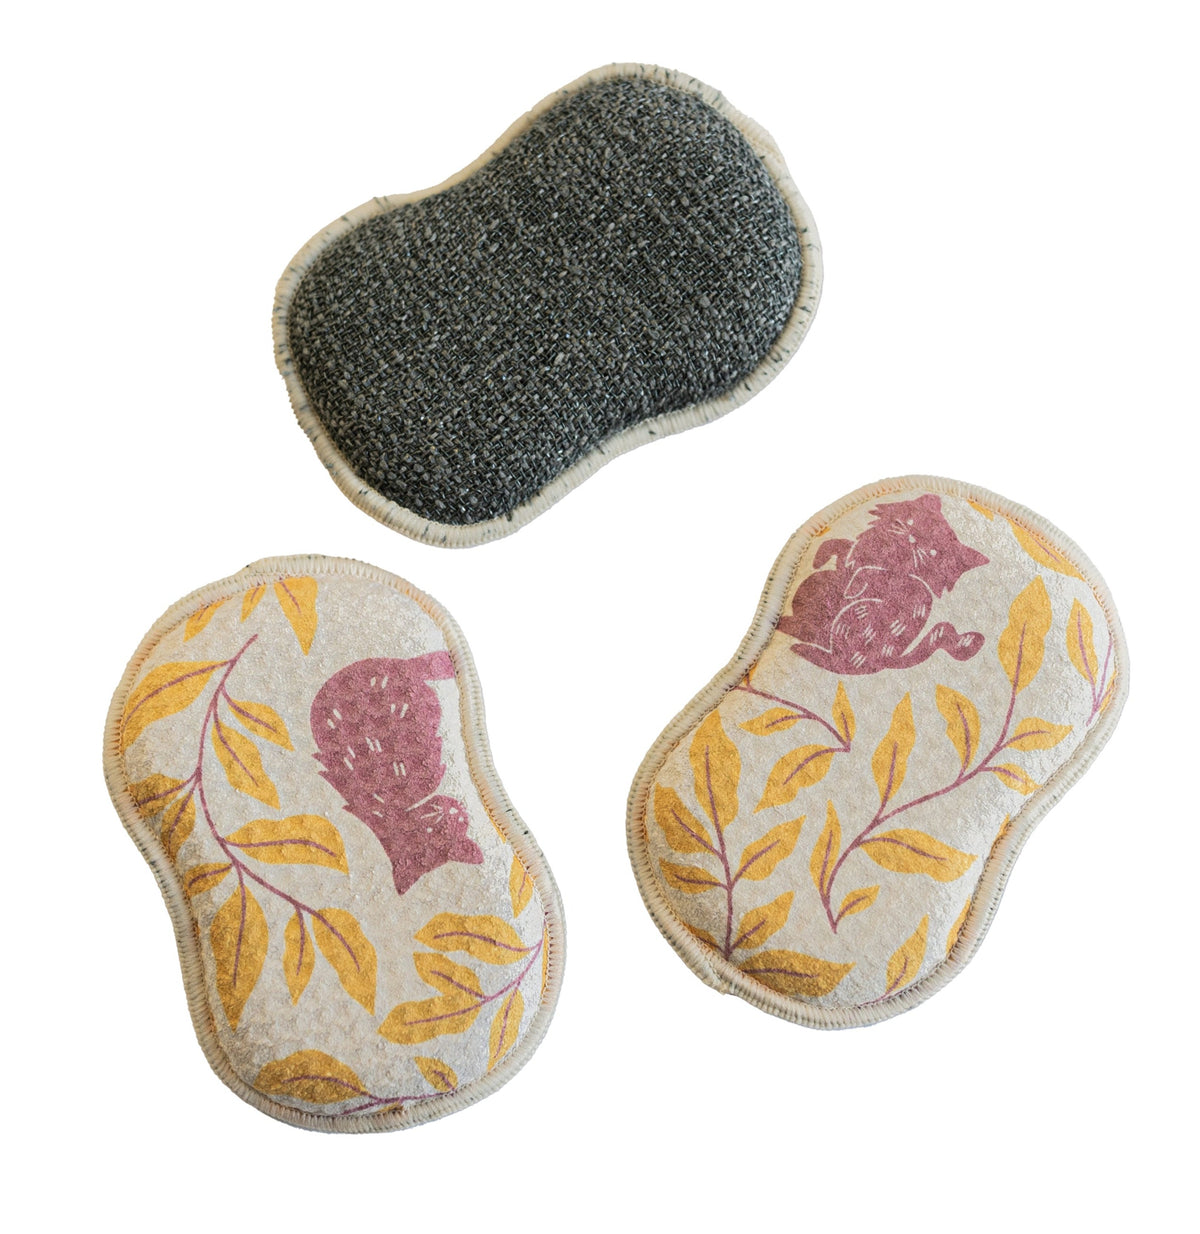 RE:usable Sponges (Set of 3) - Nuthatch Cat Club Sponges &amp; Scouring Pads Once Again Home Co.   